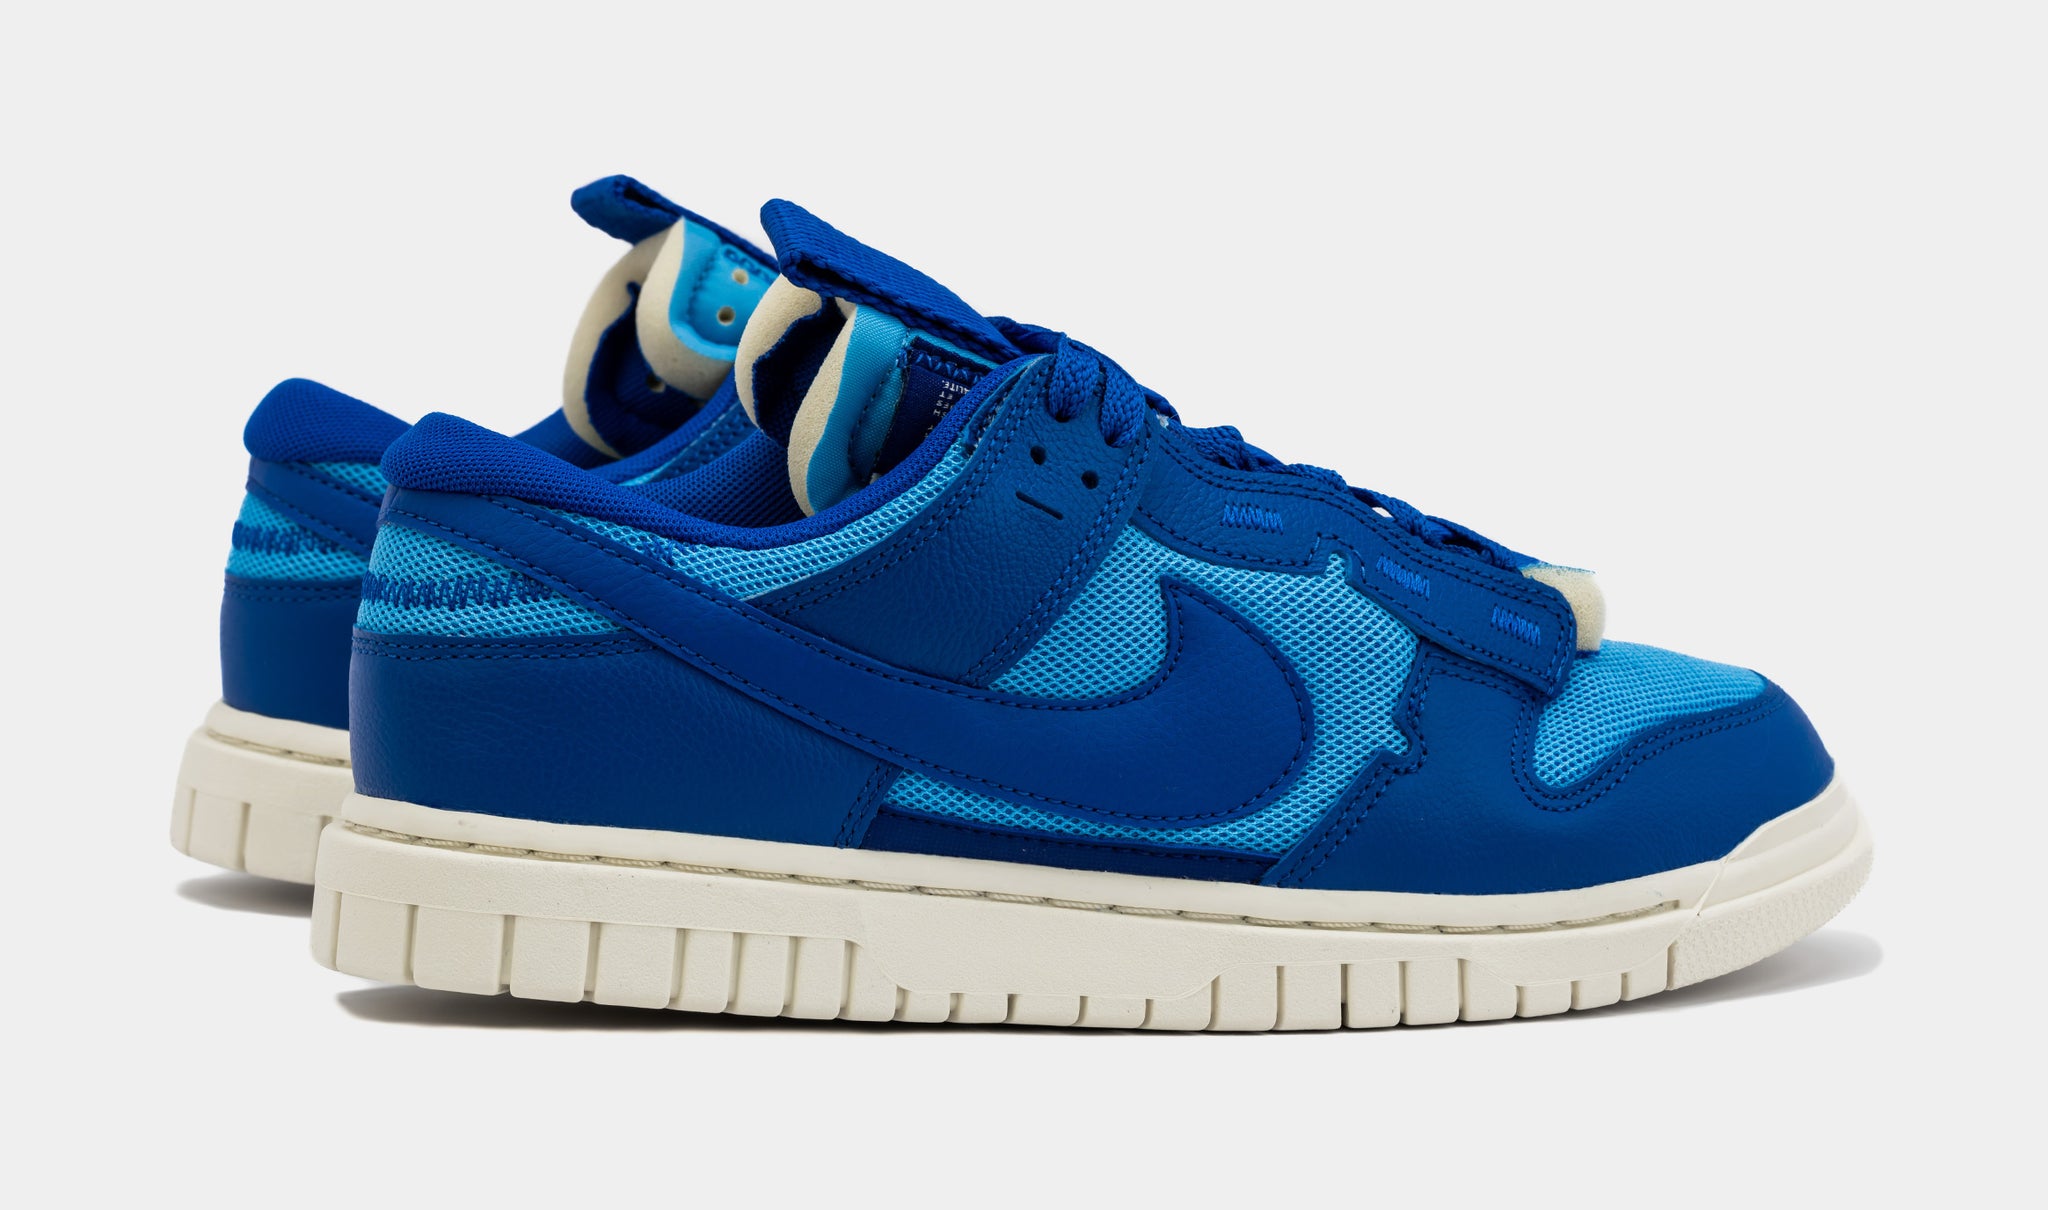 Dunk Low Remastered Game Royal Mens Lifestyle Shoes (Blue) Free Shipping